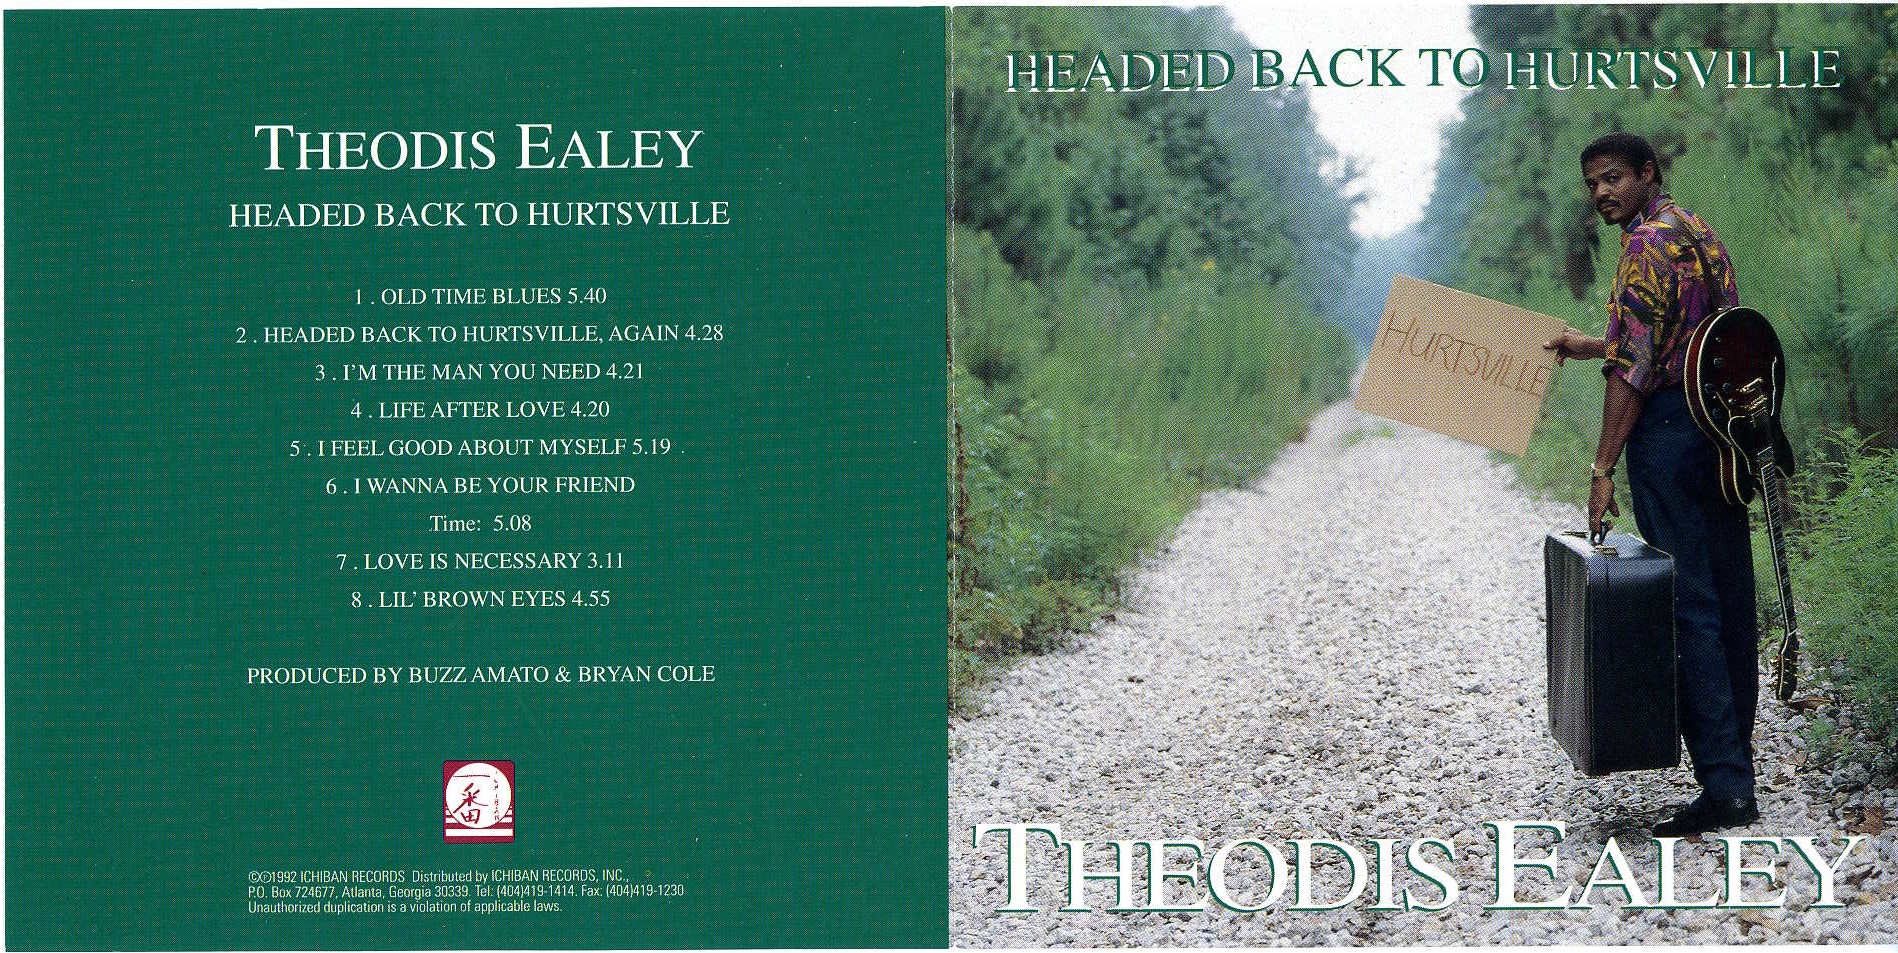 Theodis Ealey - 1992 - Headed Back To Hurtsville